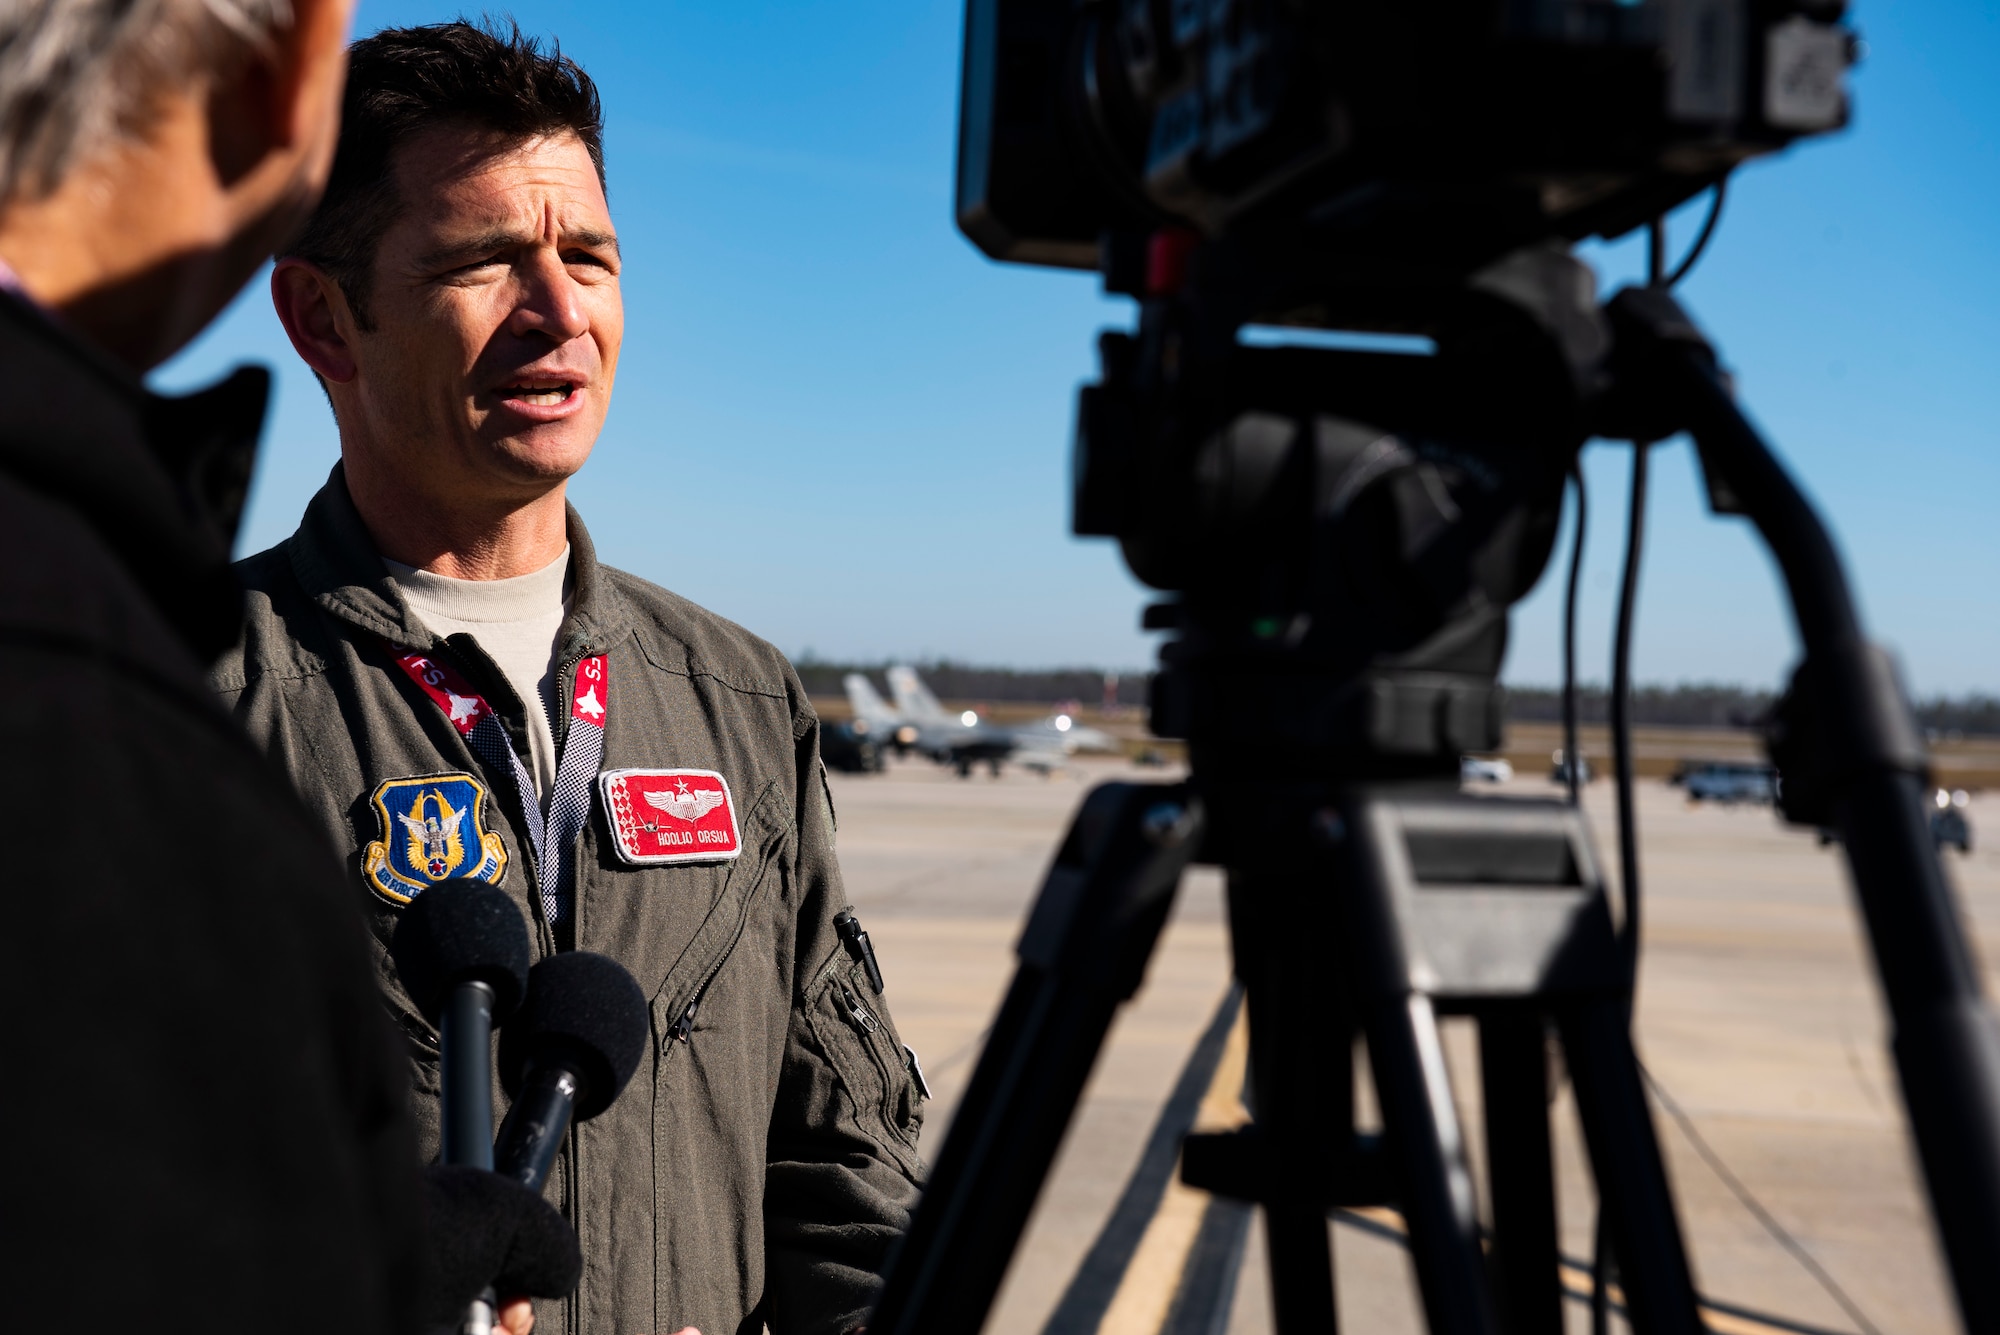 Lt. Col. Benjamin Orsua, Checkered Flag 20-1 exercise director, is interviewed by local media stations at Tyndall Air Force Base, Florida, Nov. 13, 2019. Checkered Flag is a large-scale exercise involving multiple military partners and installations, designed to focus on training and evaluating fourth and fifth-generation fighter aircraft, pilots and maintainers. In conduction with the exercise, air-to-air and air-to-ground combat operations are tested and recorded to provide data on best practices and ensuring future mission successes. (U.S. Air Force photo by Staff Sgt. Magen M. Reeves)